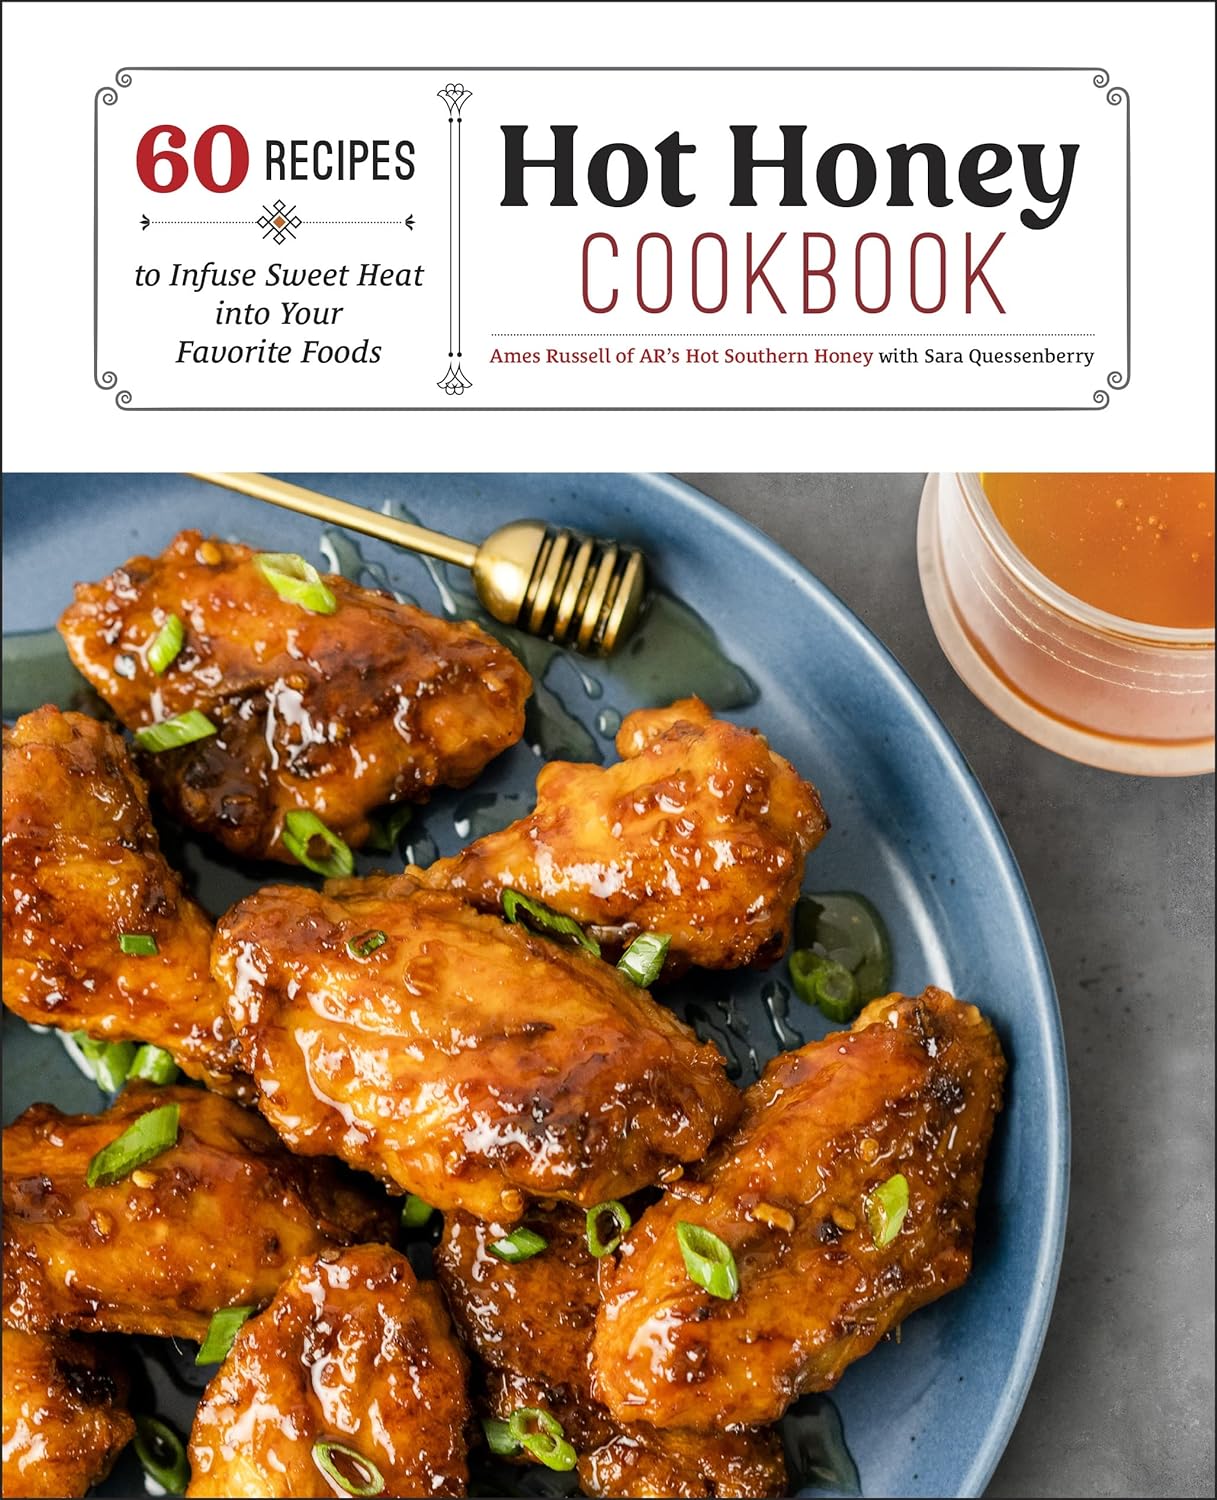 Hot Honey Cookbook: 60 Recipes to Infuse Sweet Heat into Your Favorite Foods (Ames Russell, Sara Quessenberry)